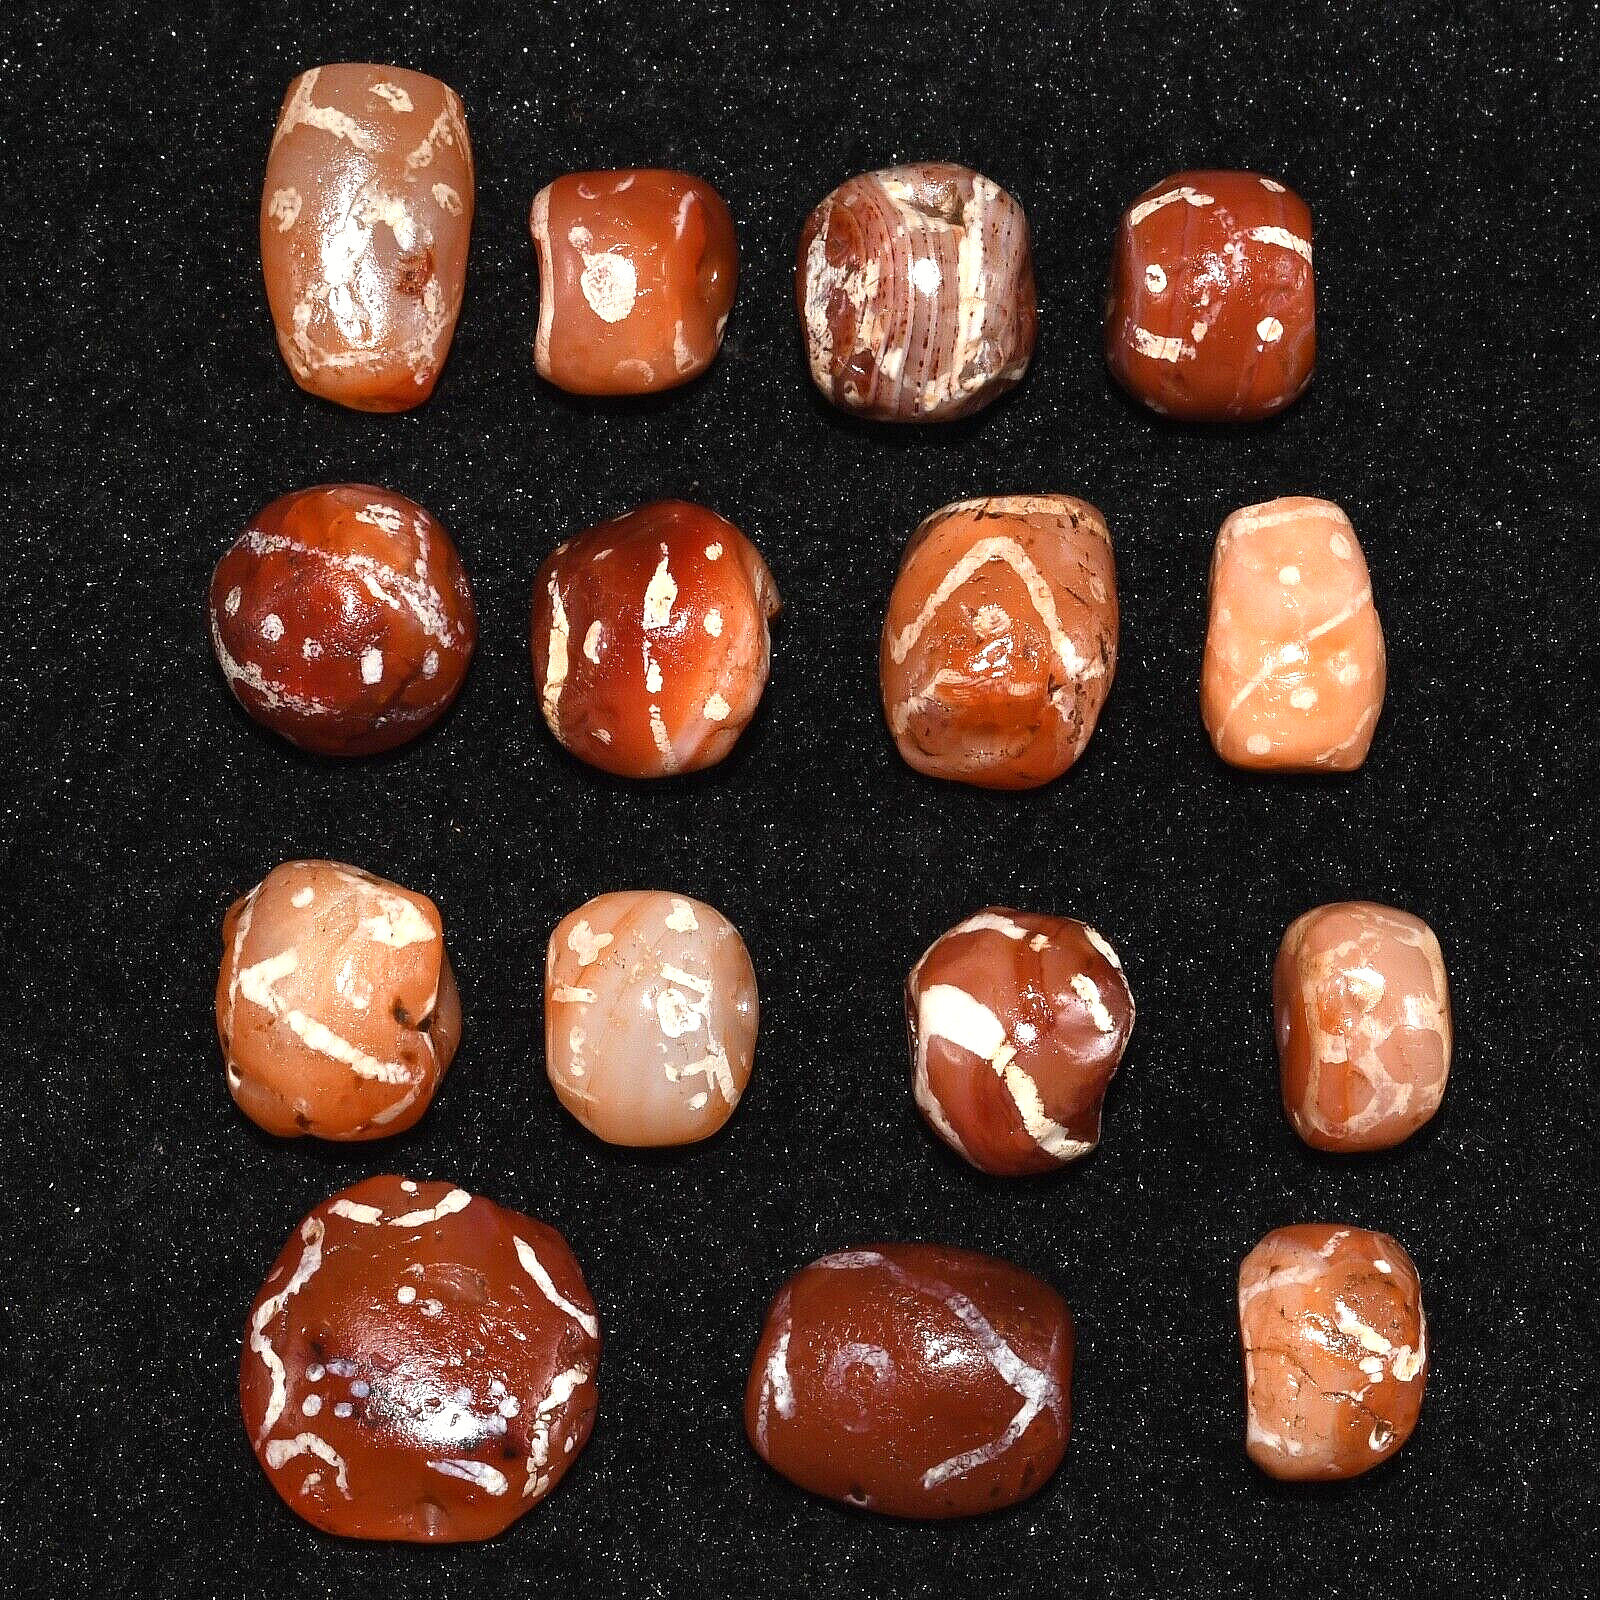 Lot Sale 15 Ancient Central Asian Etched Carnelian Beads over 2000 Years Old